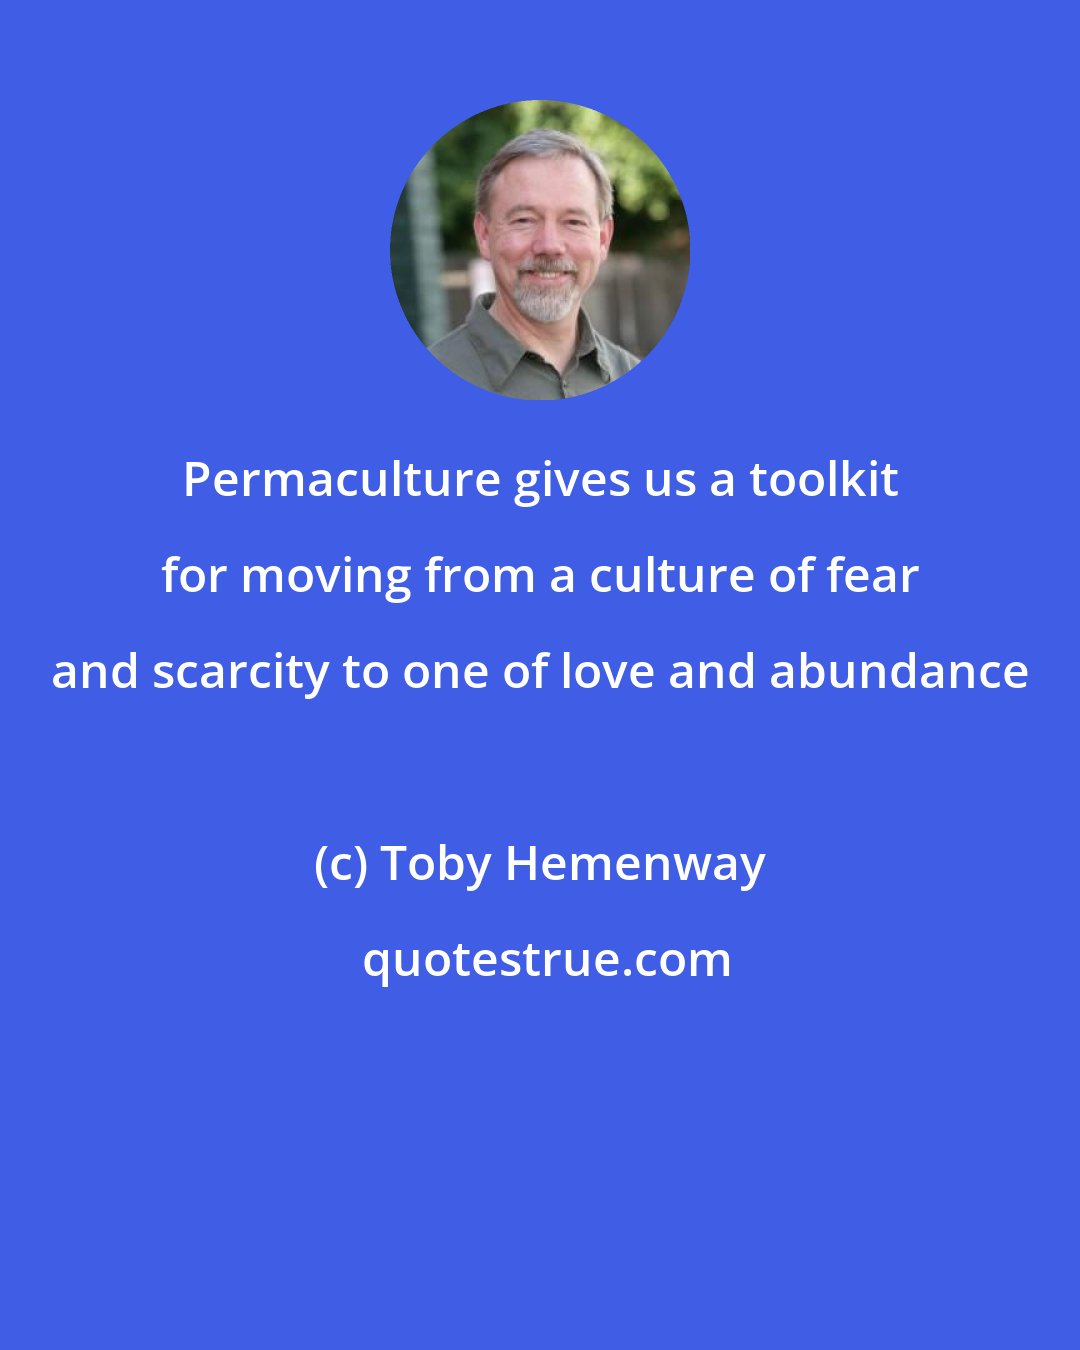 Toby Hemenway: Permaculture gives us a toolkit for moving from a culture of fear and scarcity to one of love and abundance